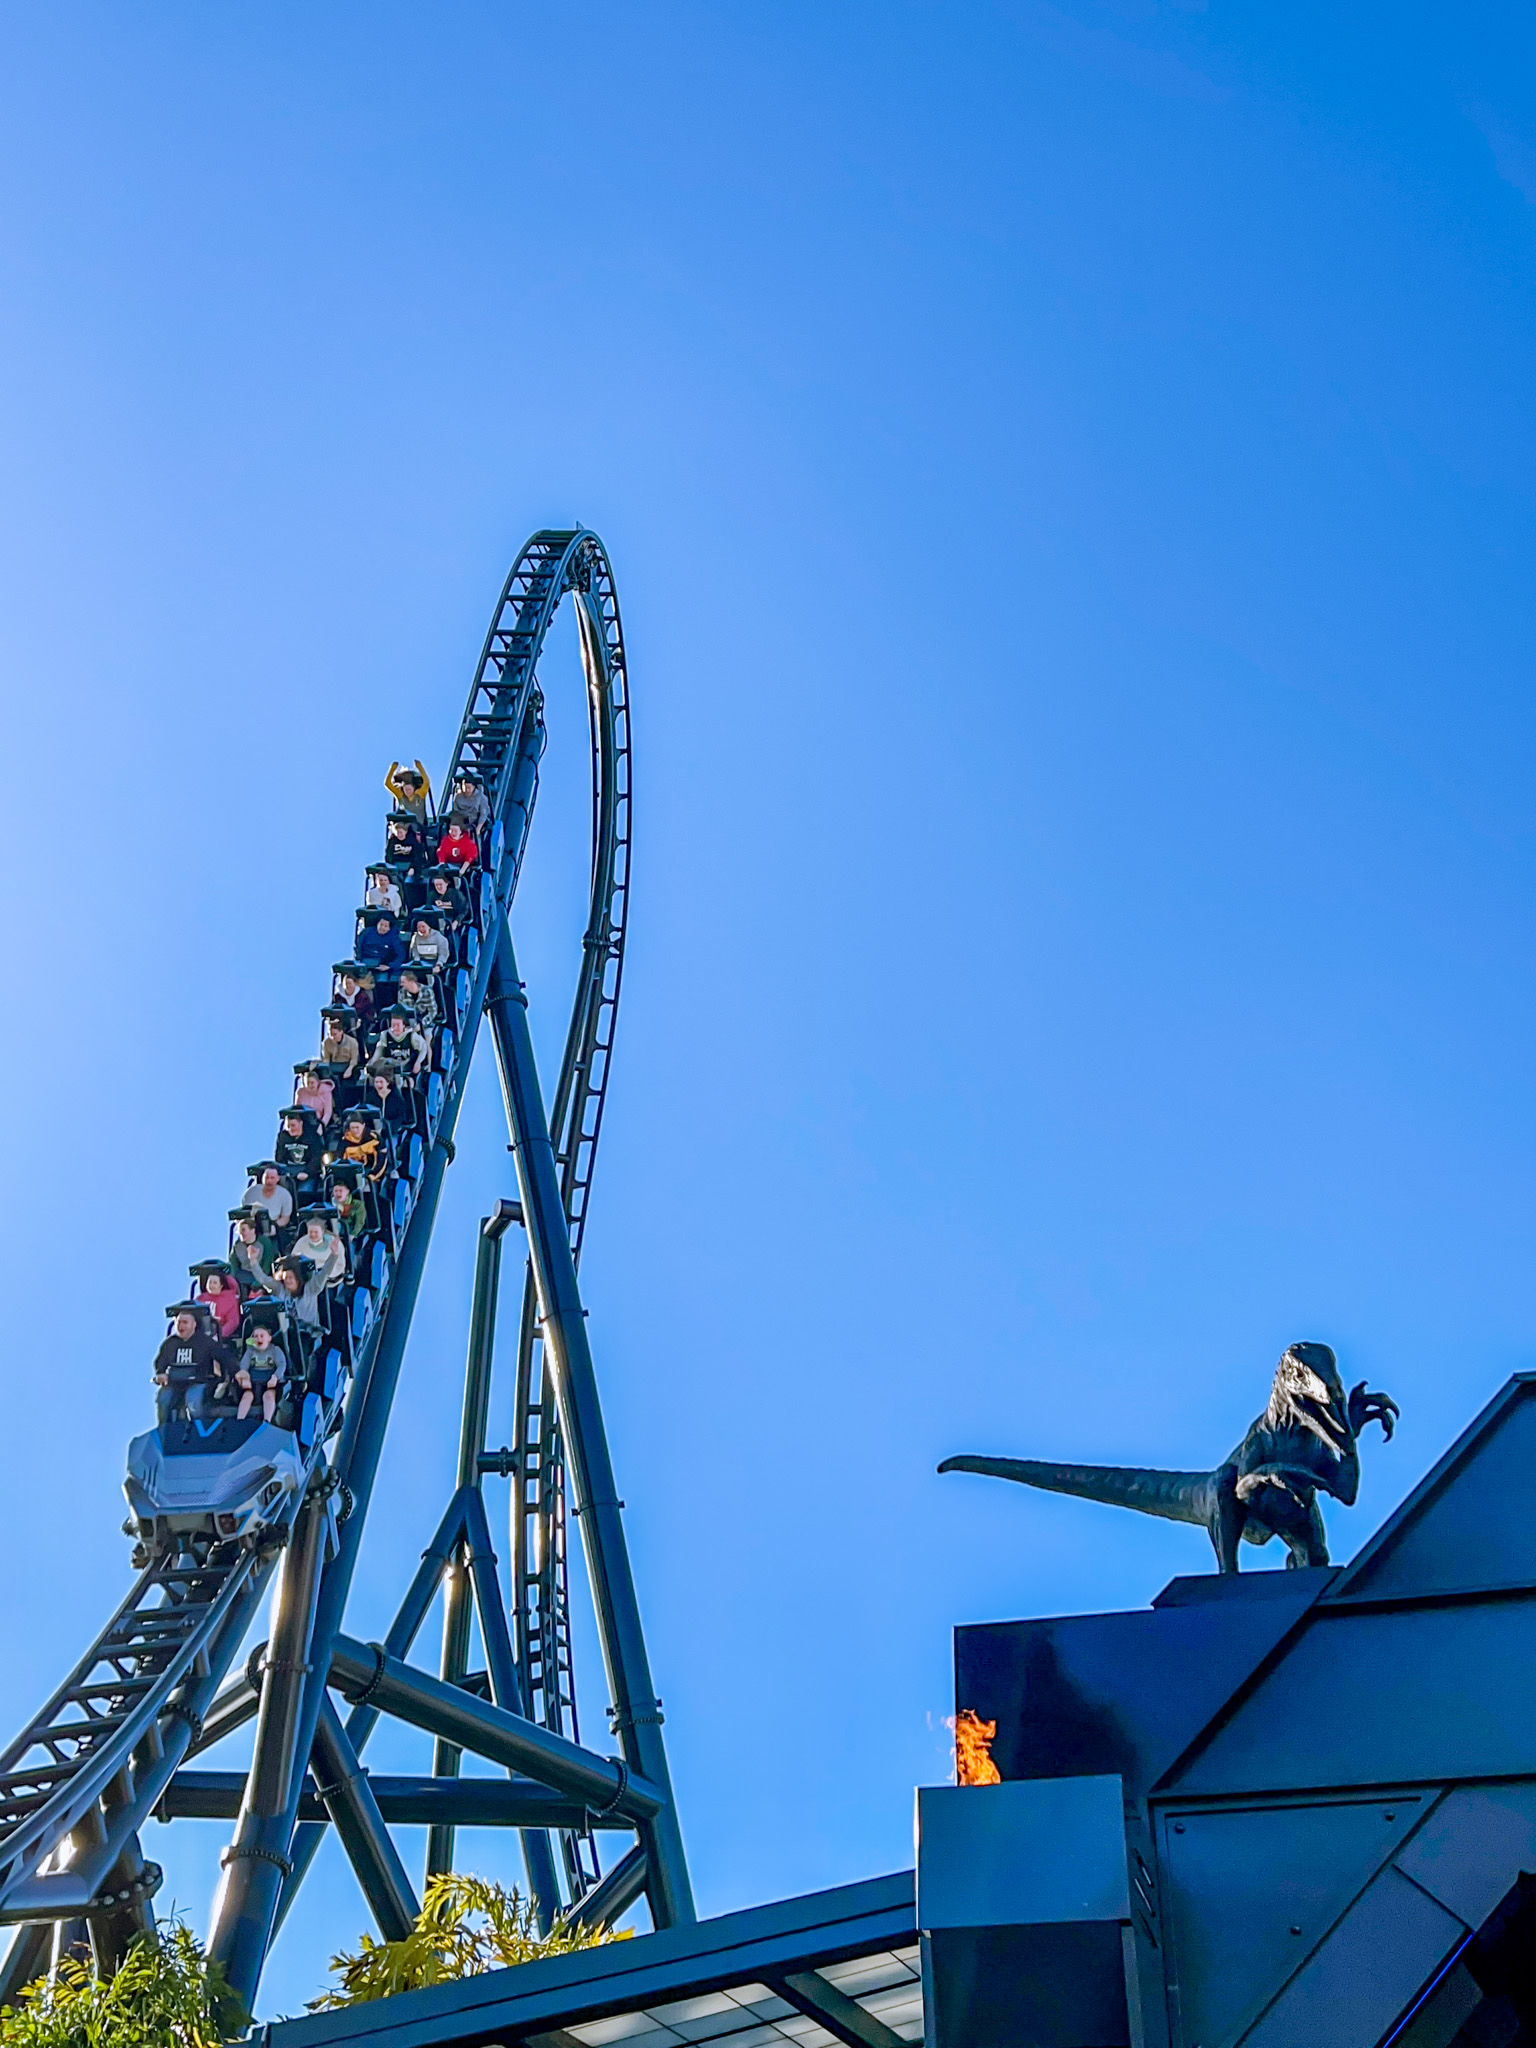 The Top 3 Rollercoasters At Universal Orlando Resort